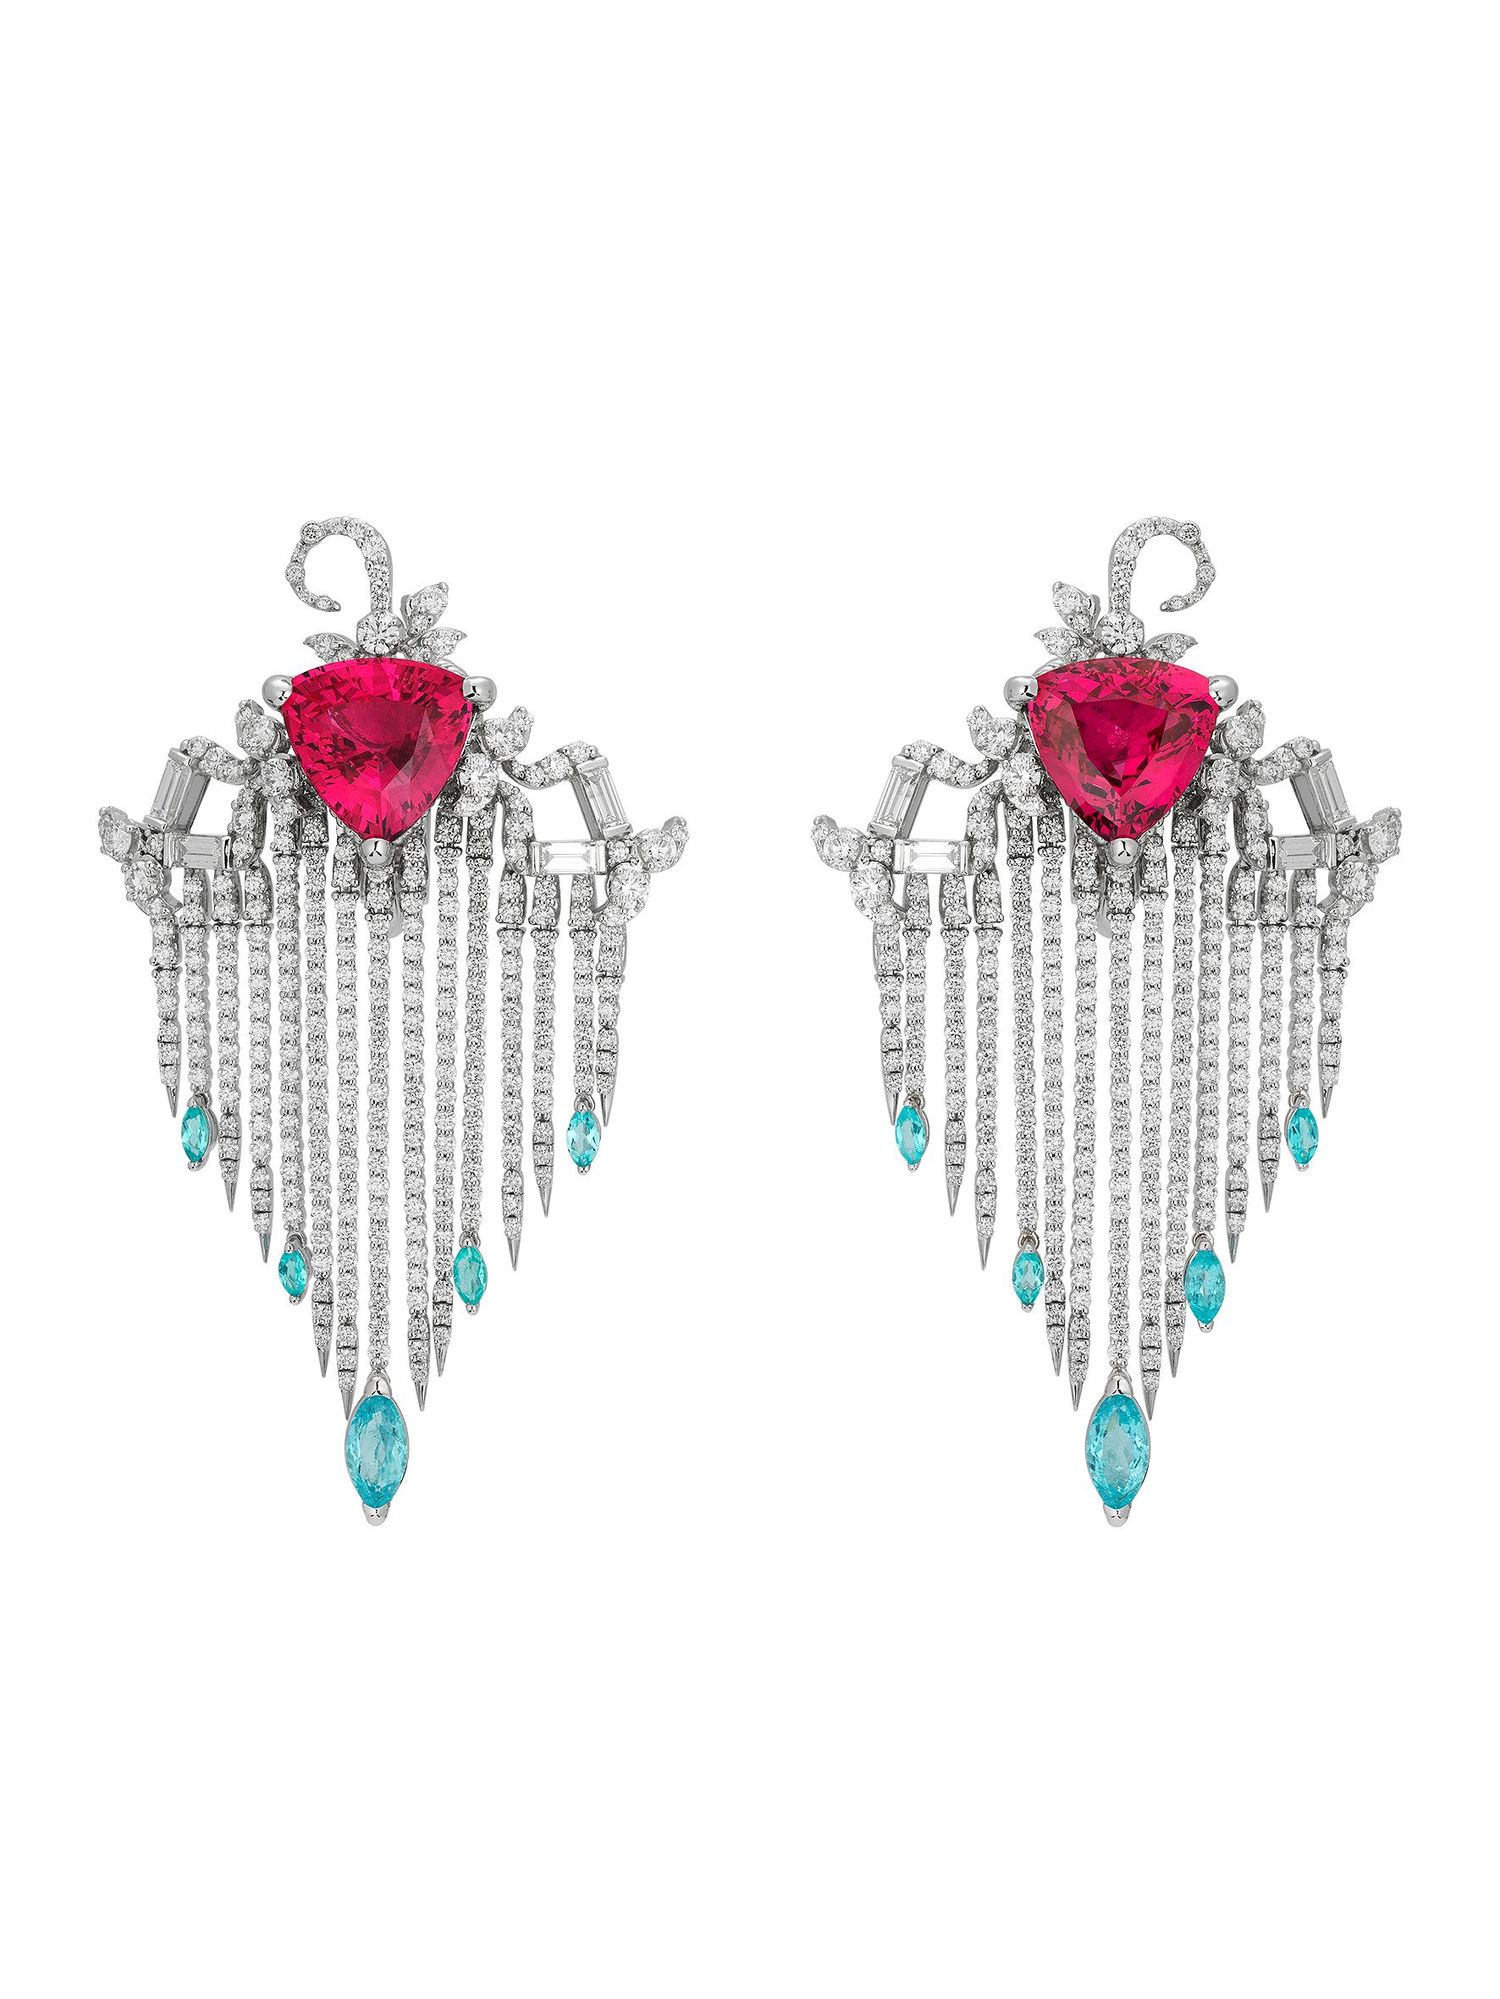 Gucci Unveils New Allegoria High Jewelry Collection Inspired by